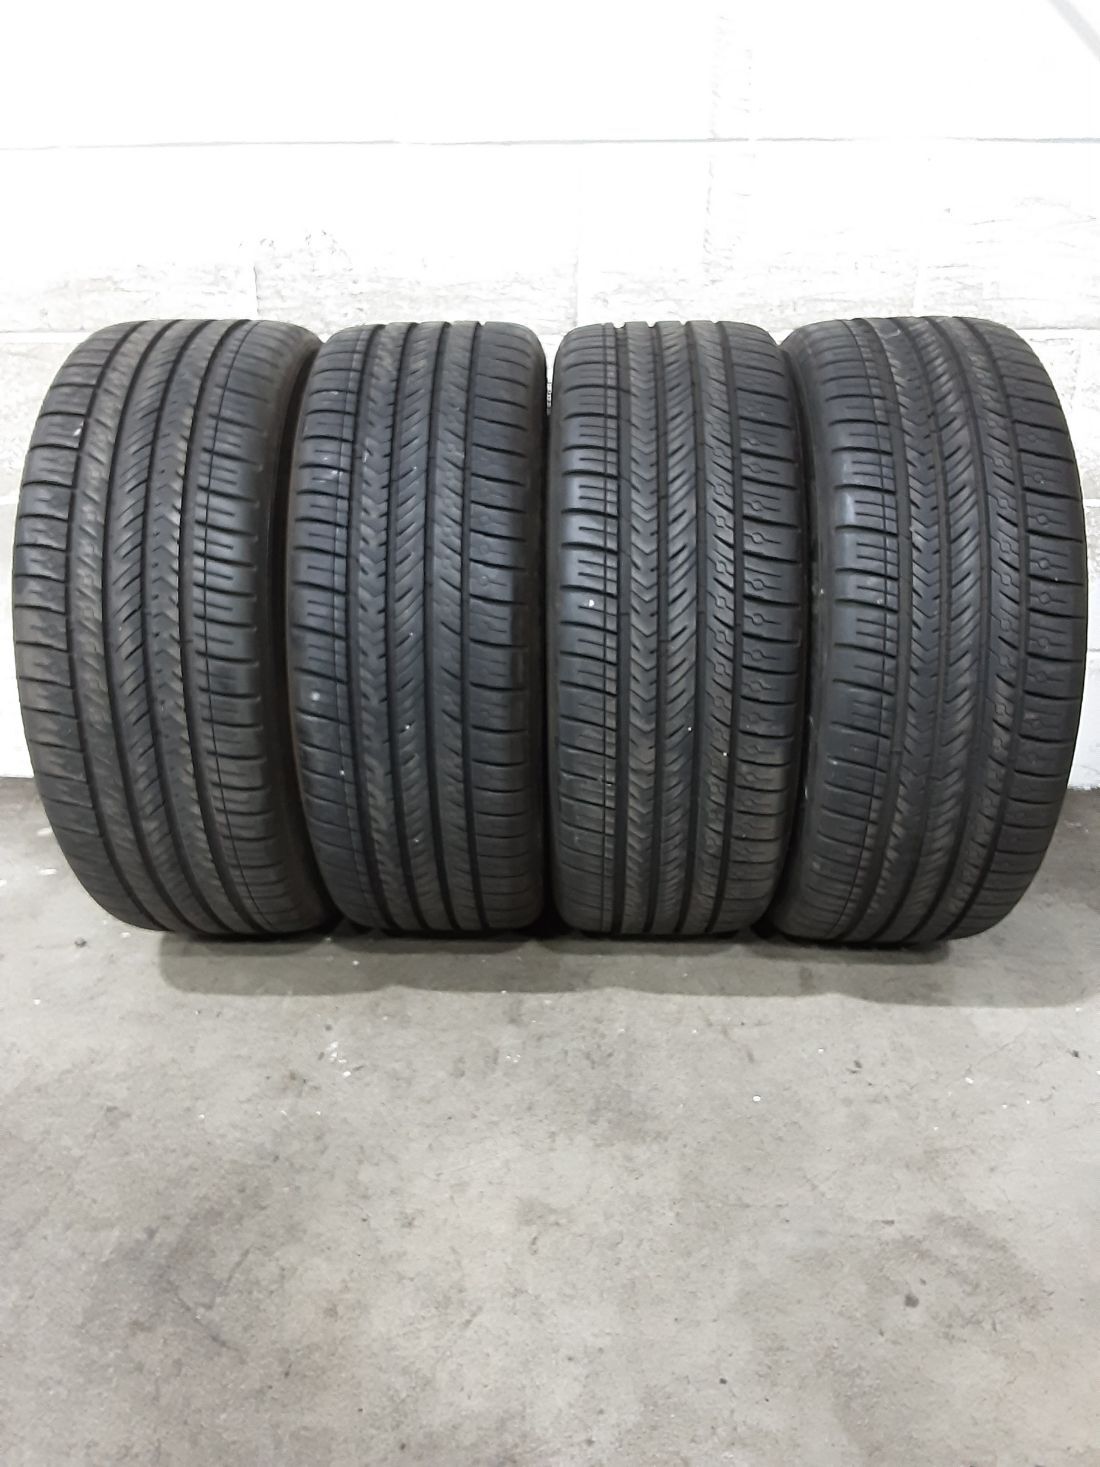 4x P215/45R18 Michelin Pilot Sport A/S 4 8/32 Used Tires